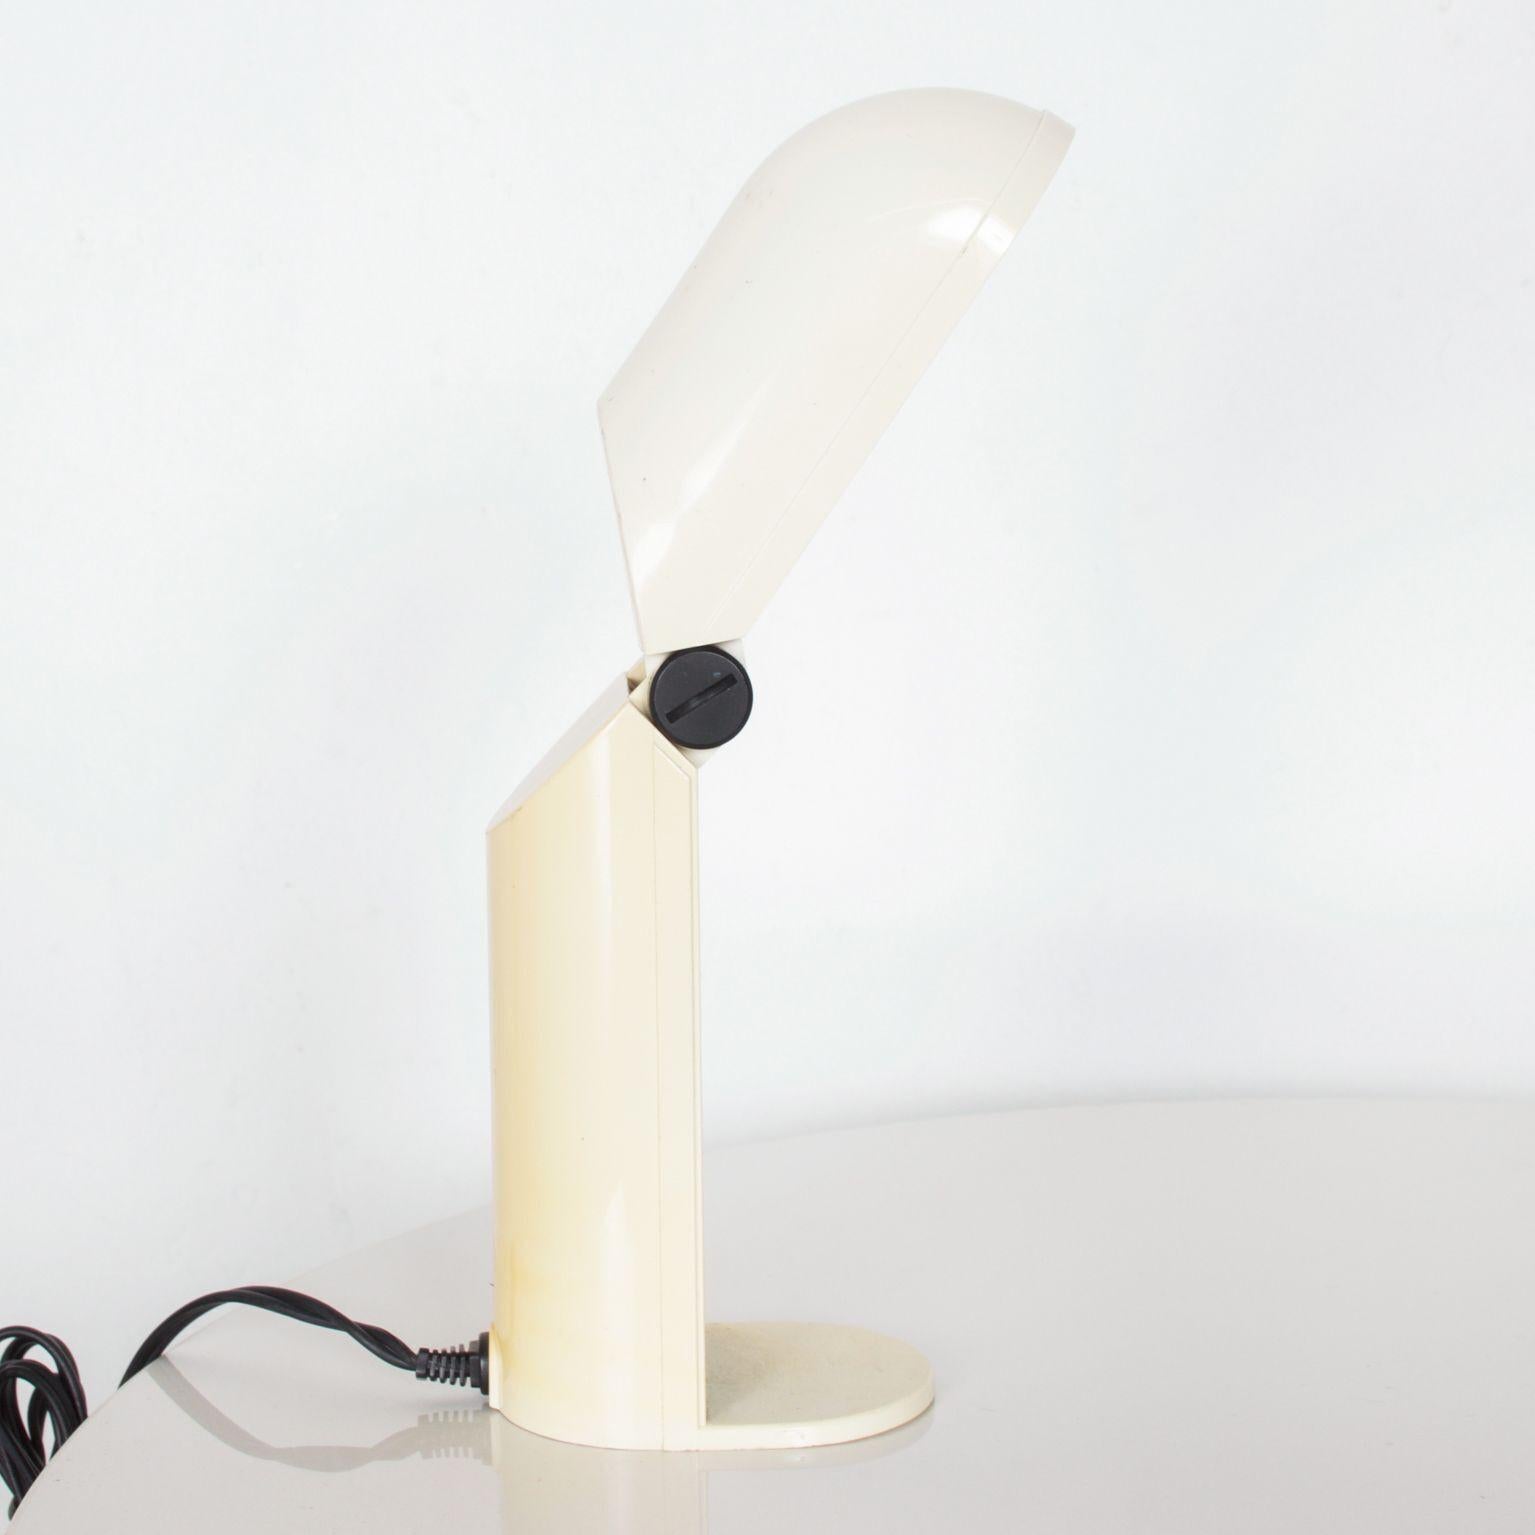 For your pleasure: By Yamada Shomei modular Manon table desk lamp, the 1970s

Mid-Century Modern foldable modular design Japanese desk lamp.

The light turns on and off by moving the diffuser. By opening the diffuser, the light will turn on and by